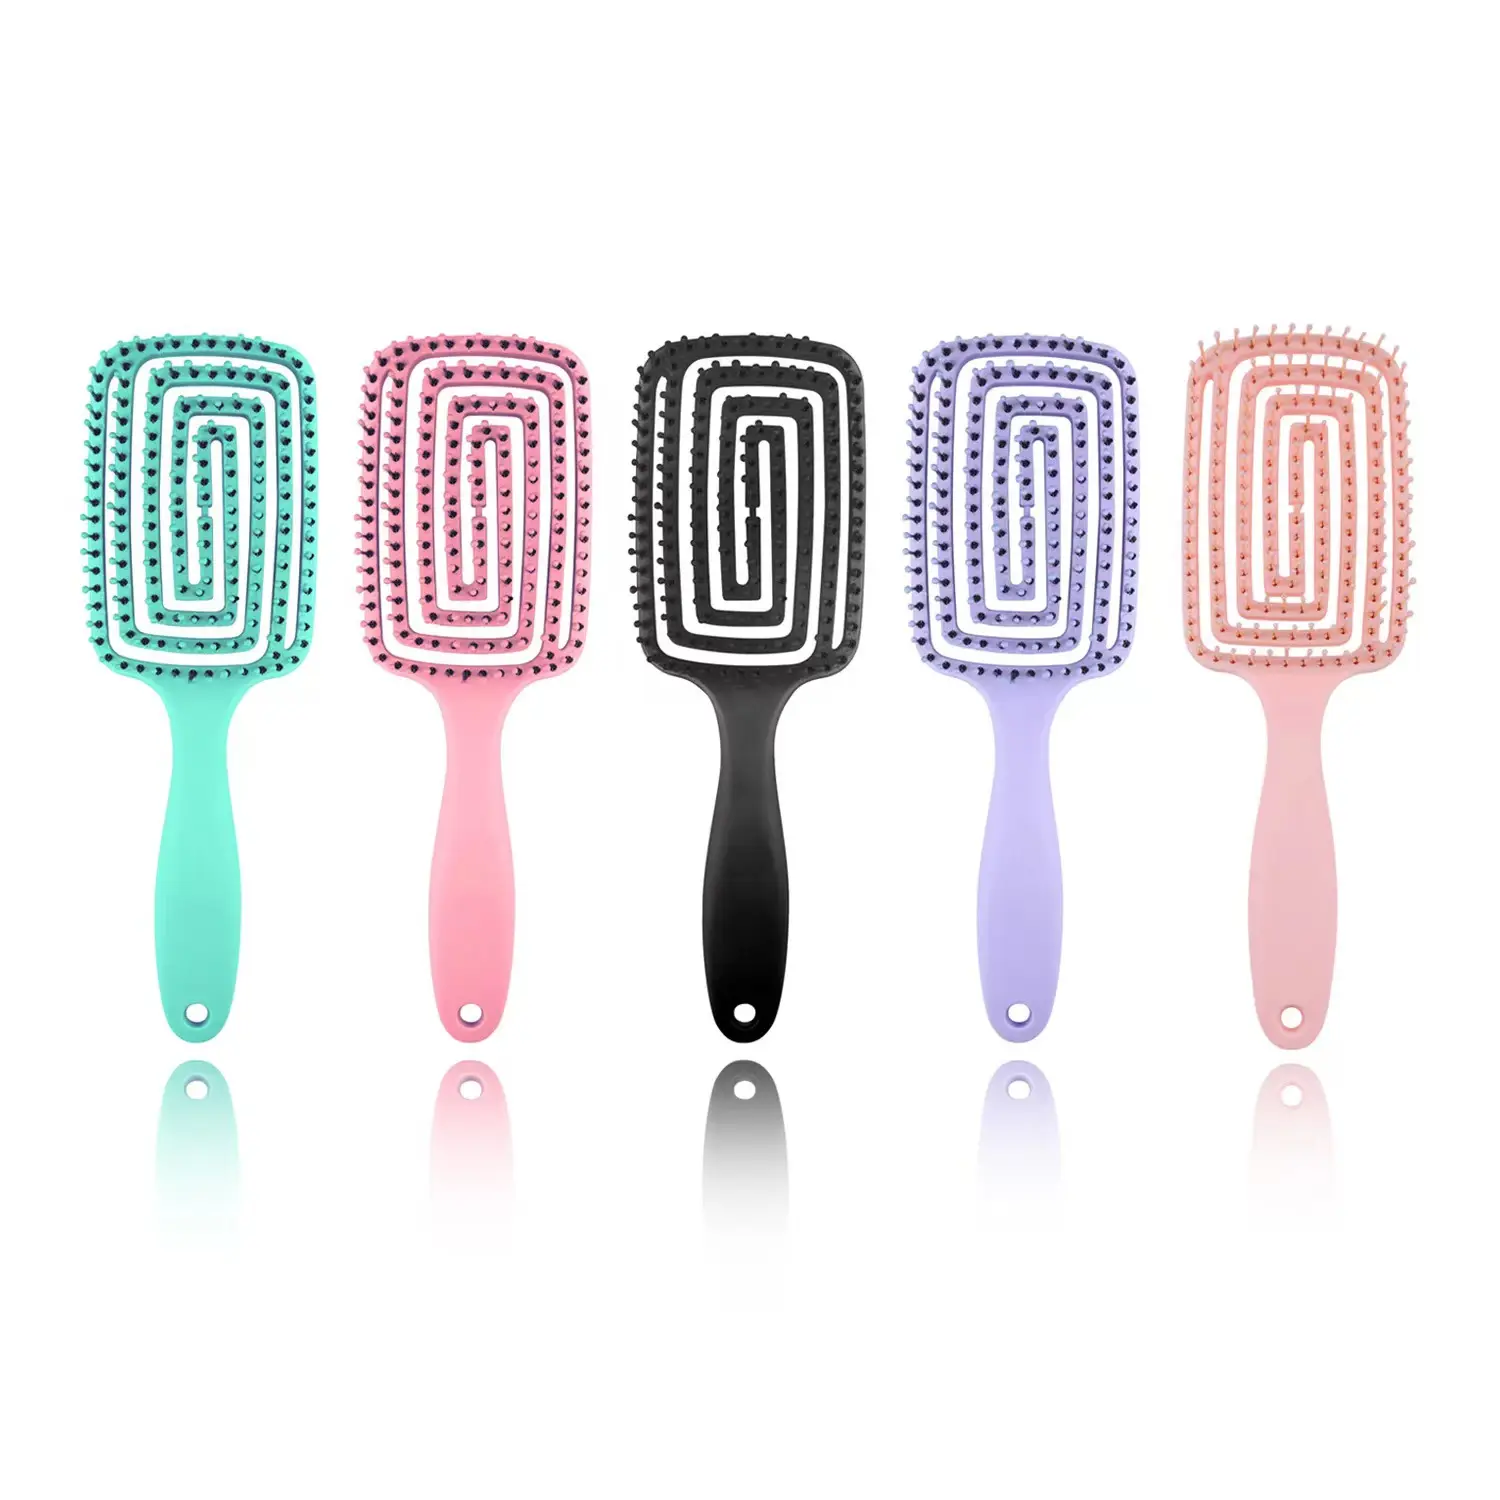 Waterproof Styling Plastic Massage Comb Anti-Static Dry Wet Curved Ventilation Opening Natural Degumming Aid Waterproof Handle